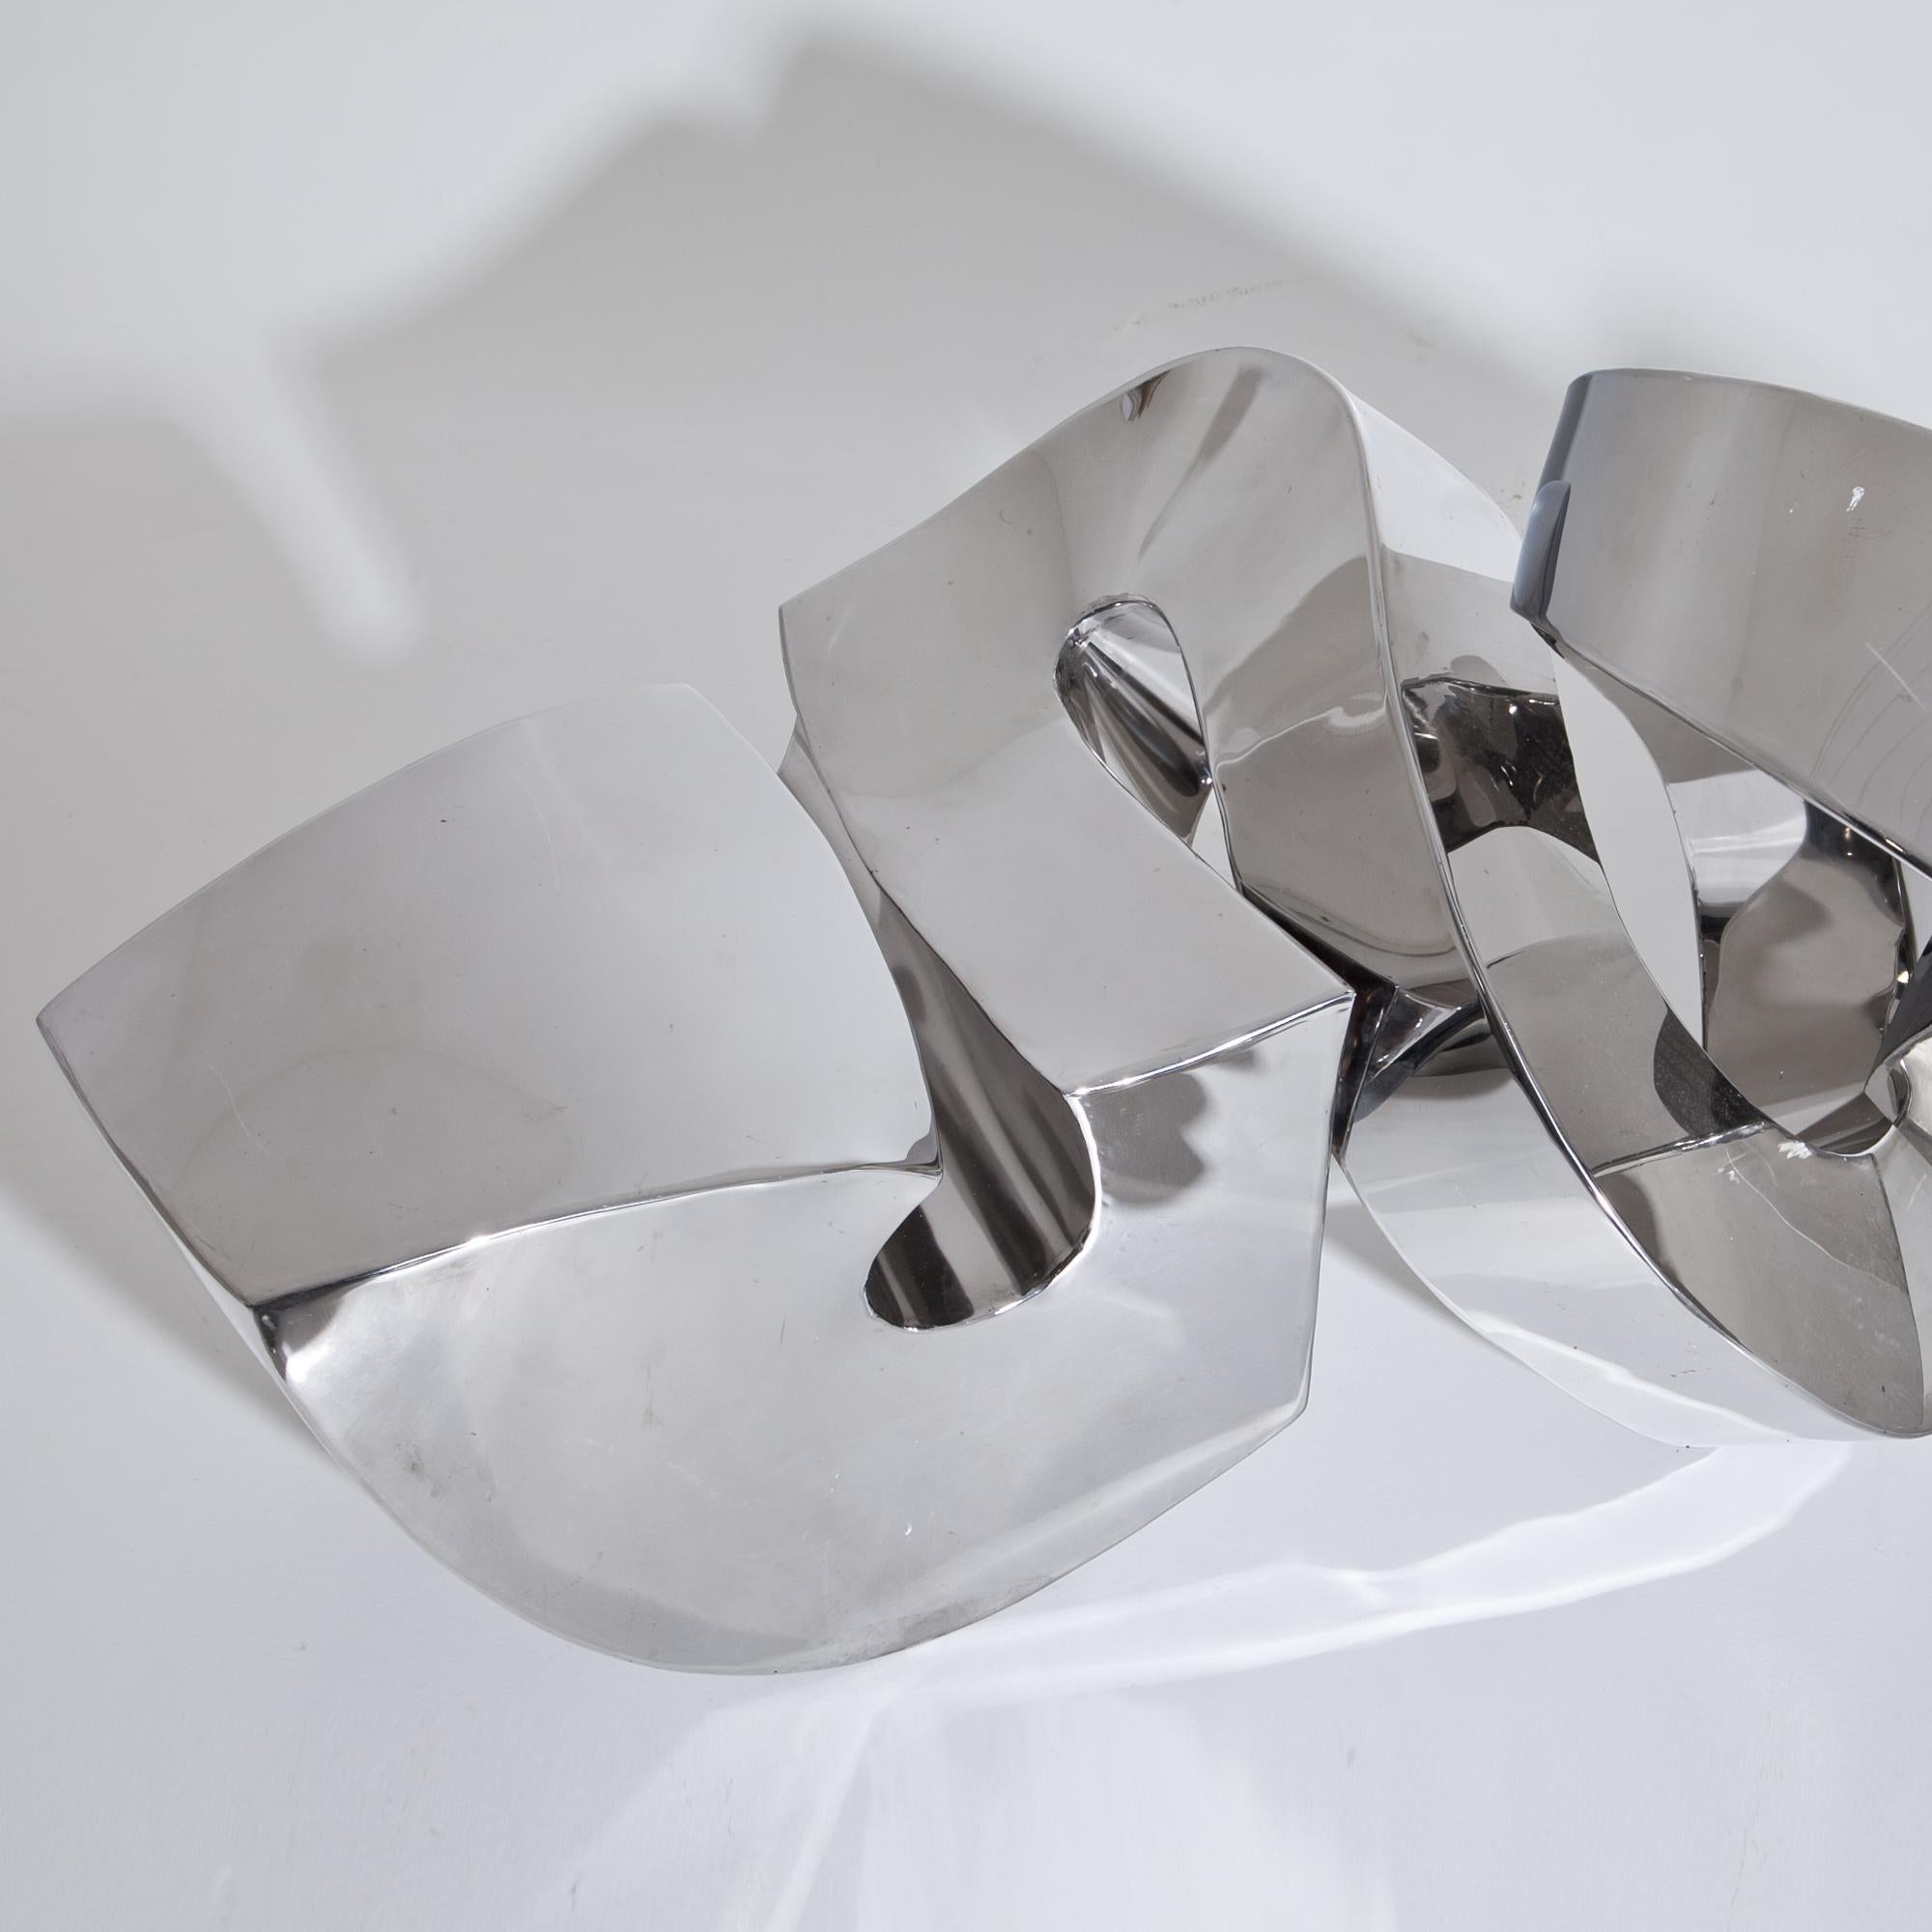 REFLEKTOR, Jörg Bach, 2013, polished Stainless Steel, Abstract Sculpture, Germany For Sale 4